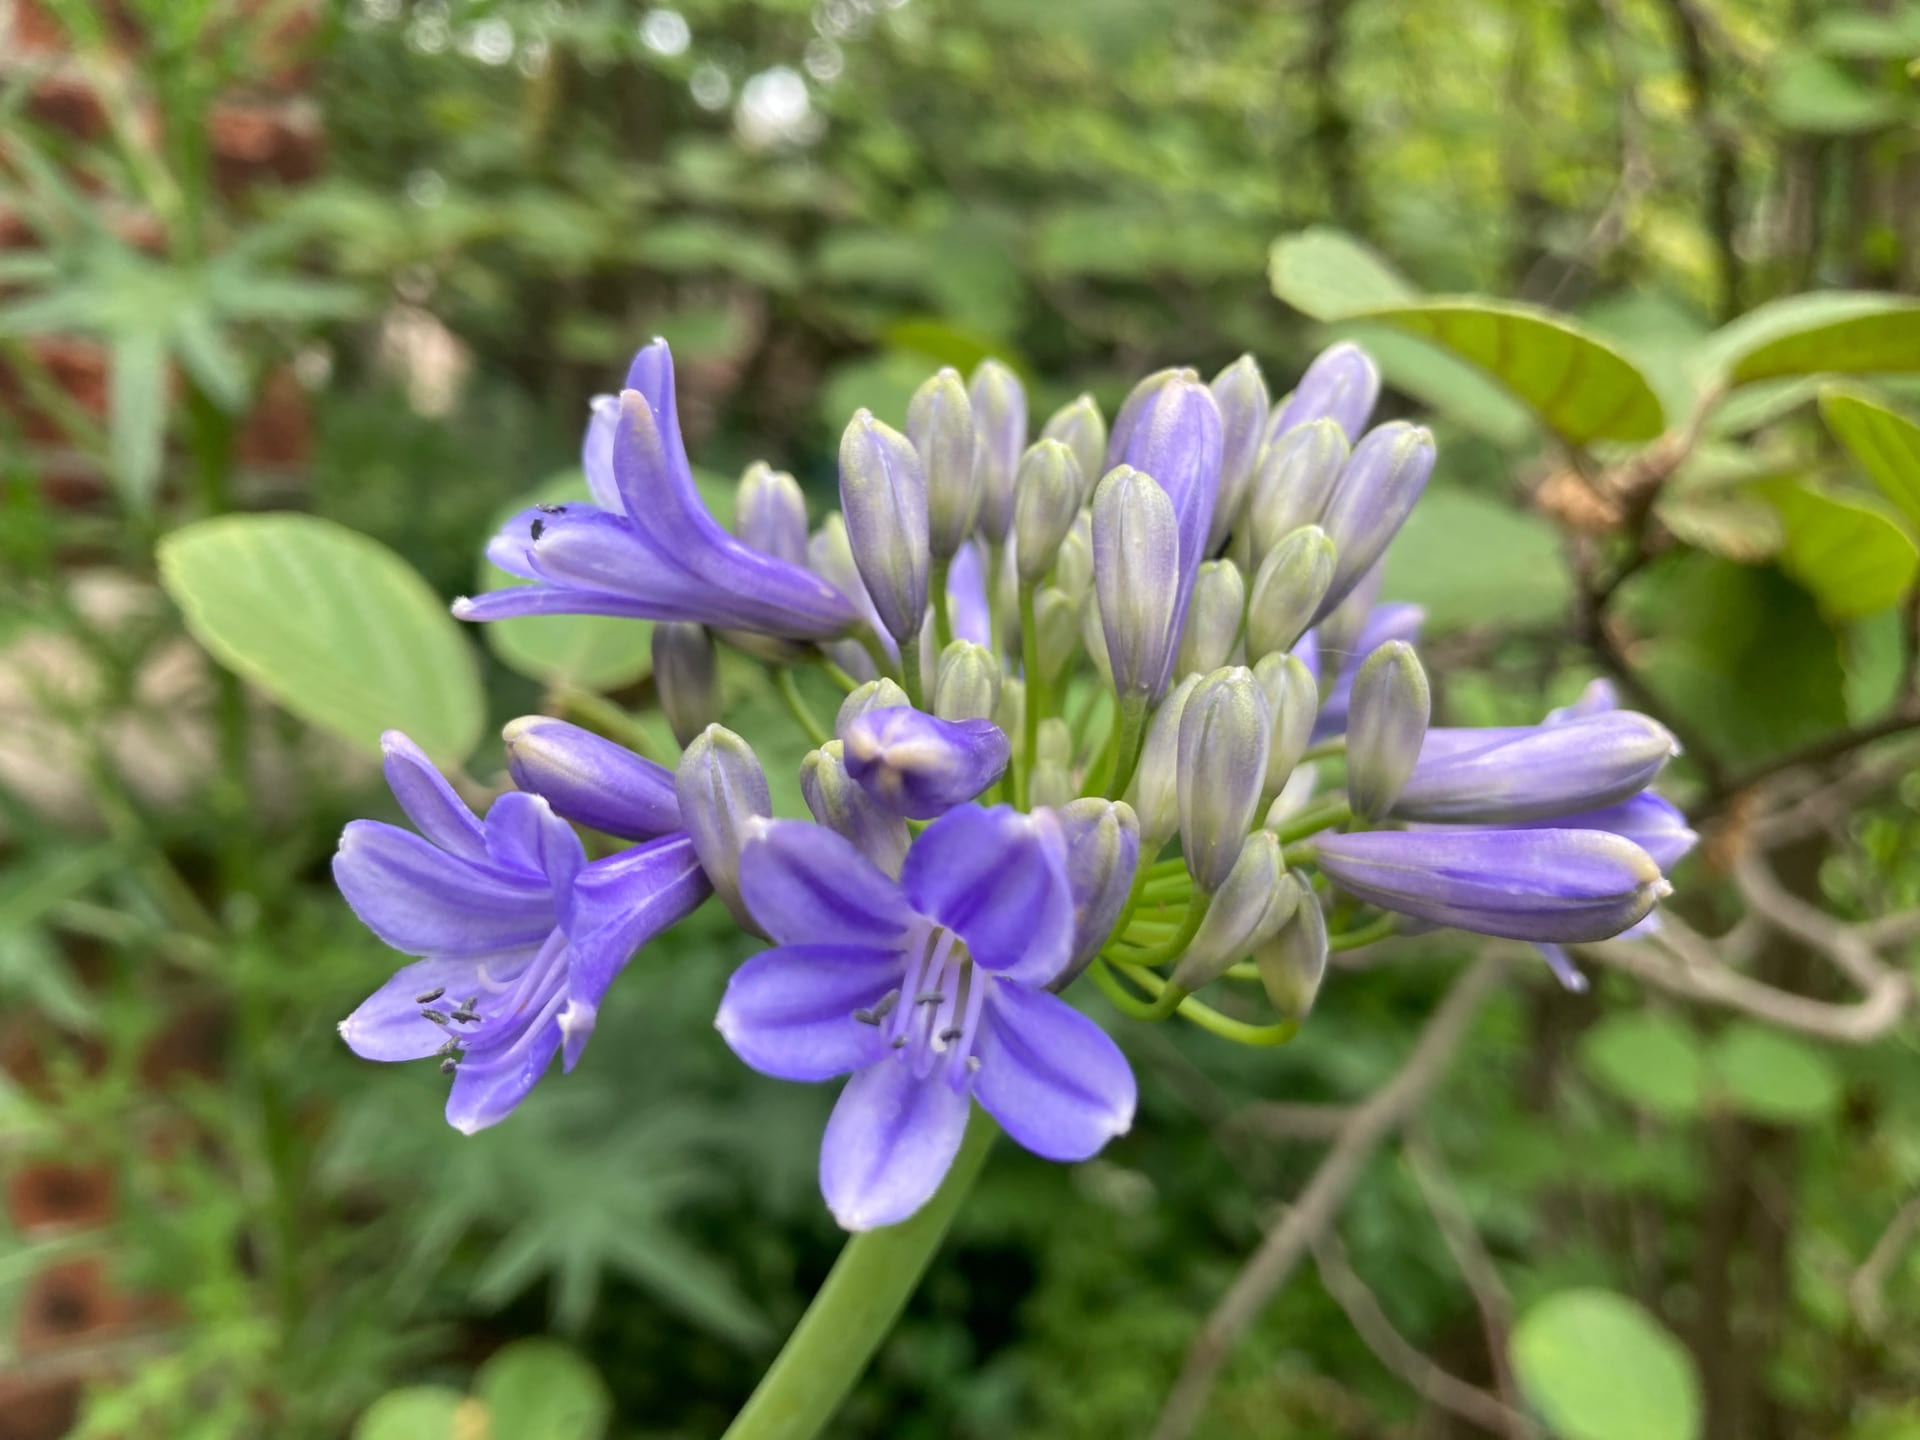 Since it is marginally hardy, it is a treat to see the blooms of Agapanthus 'Storm Cloud'.